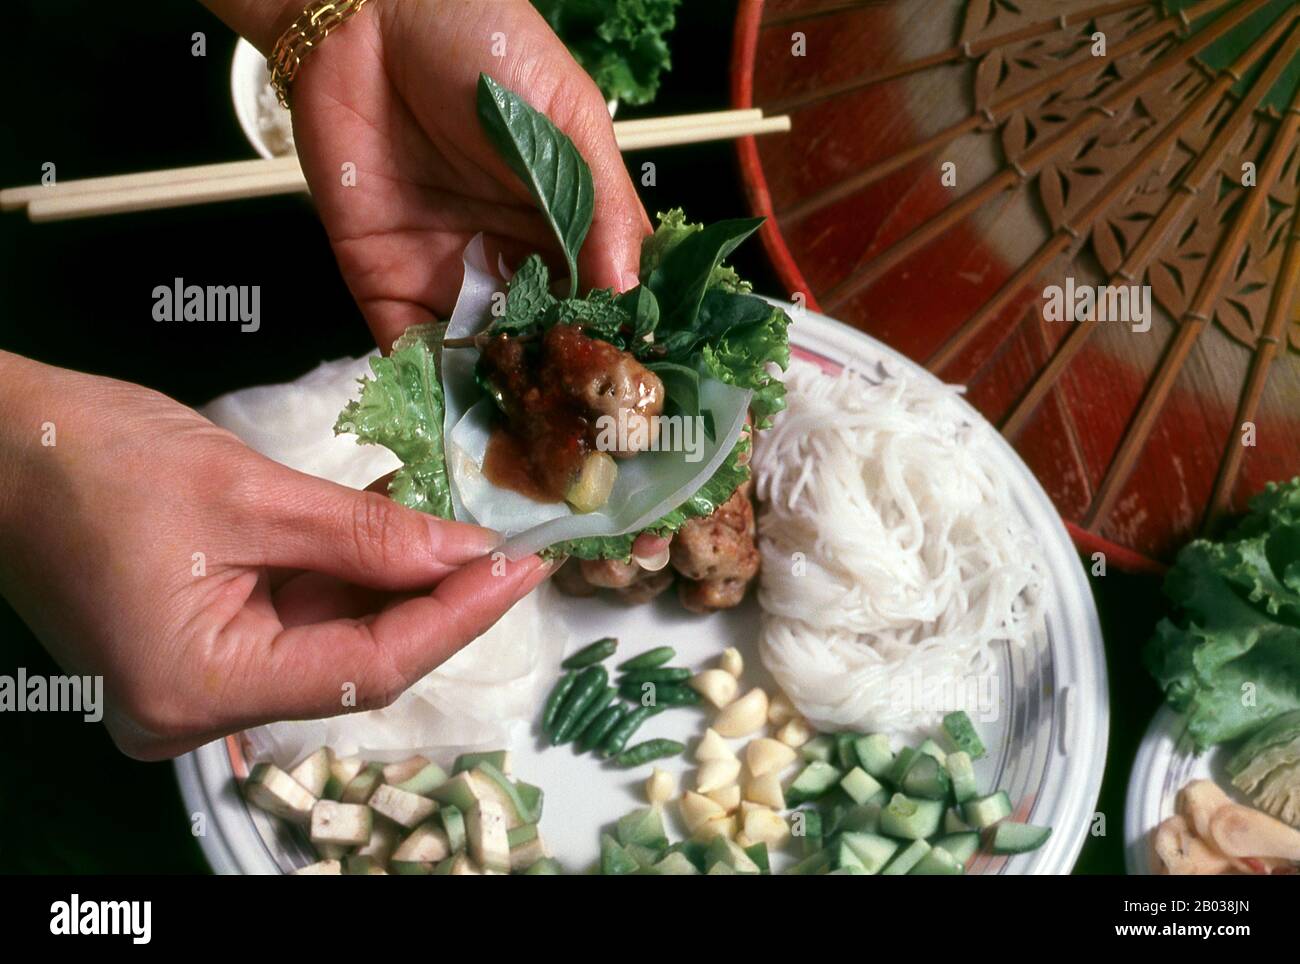 Nem nướng can be eaten alone as an appetizer or snack, and dipped in Nước chấm (dipping sauce), or with a peanut dip. Nước chấm is fish sauce diluted with water and flavored with sugar, lime juice, chopped raw garlic, chopped fresh bird's eye chili (Thai chili)/cayenne pepper, and sometimes with vinegar. The peanut sauce is made of peanut butter and hoisin sauce, flavored with fish sauce and crushed garlic, topped with crushed roasted peanut. It is served with fresh vegetables such as lettuce, julienned pickled vegetables like carrots and white radishes, and fresh herbs like mint and basil. Stock Photo